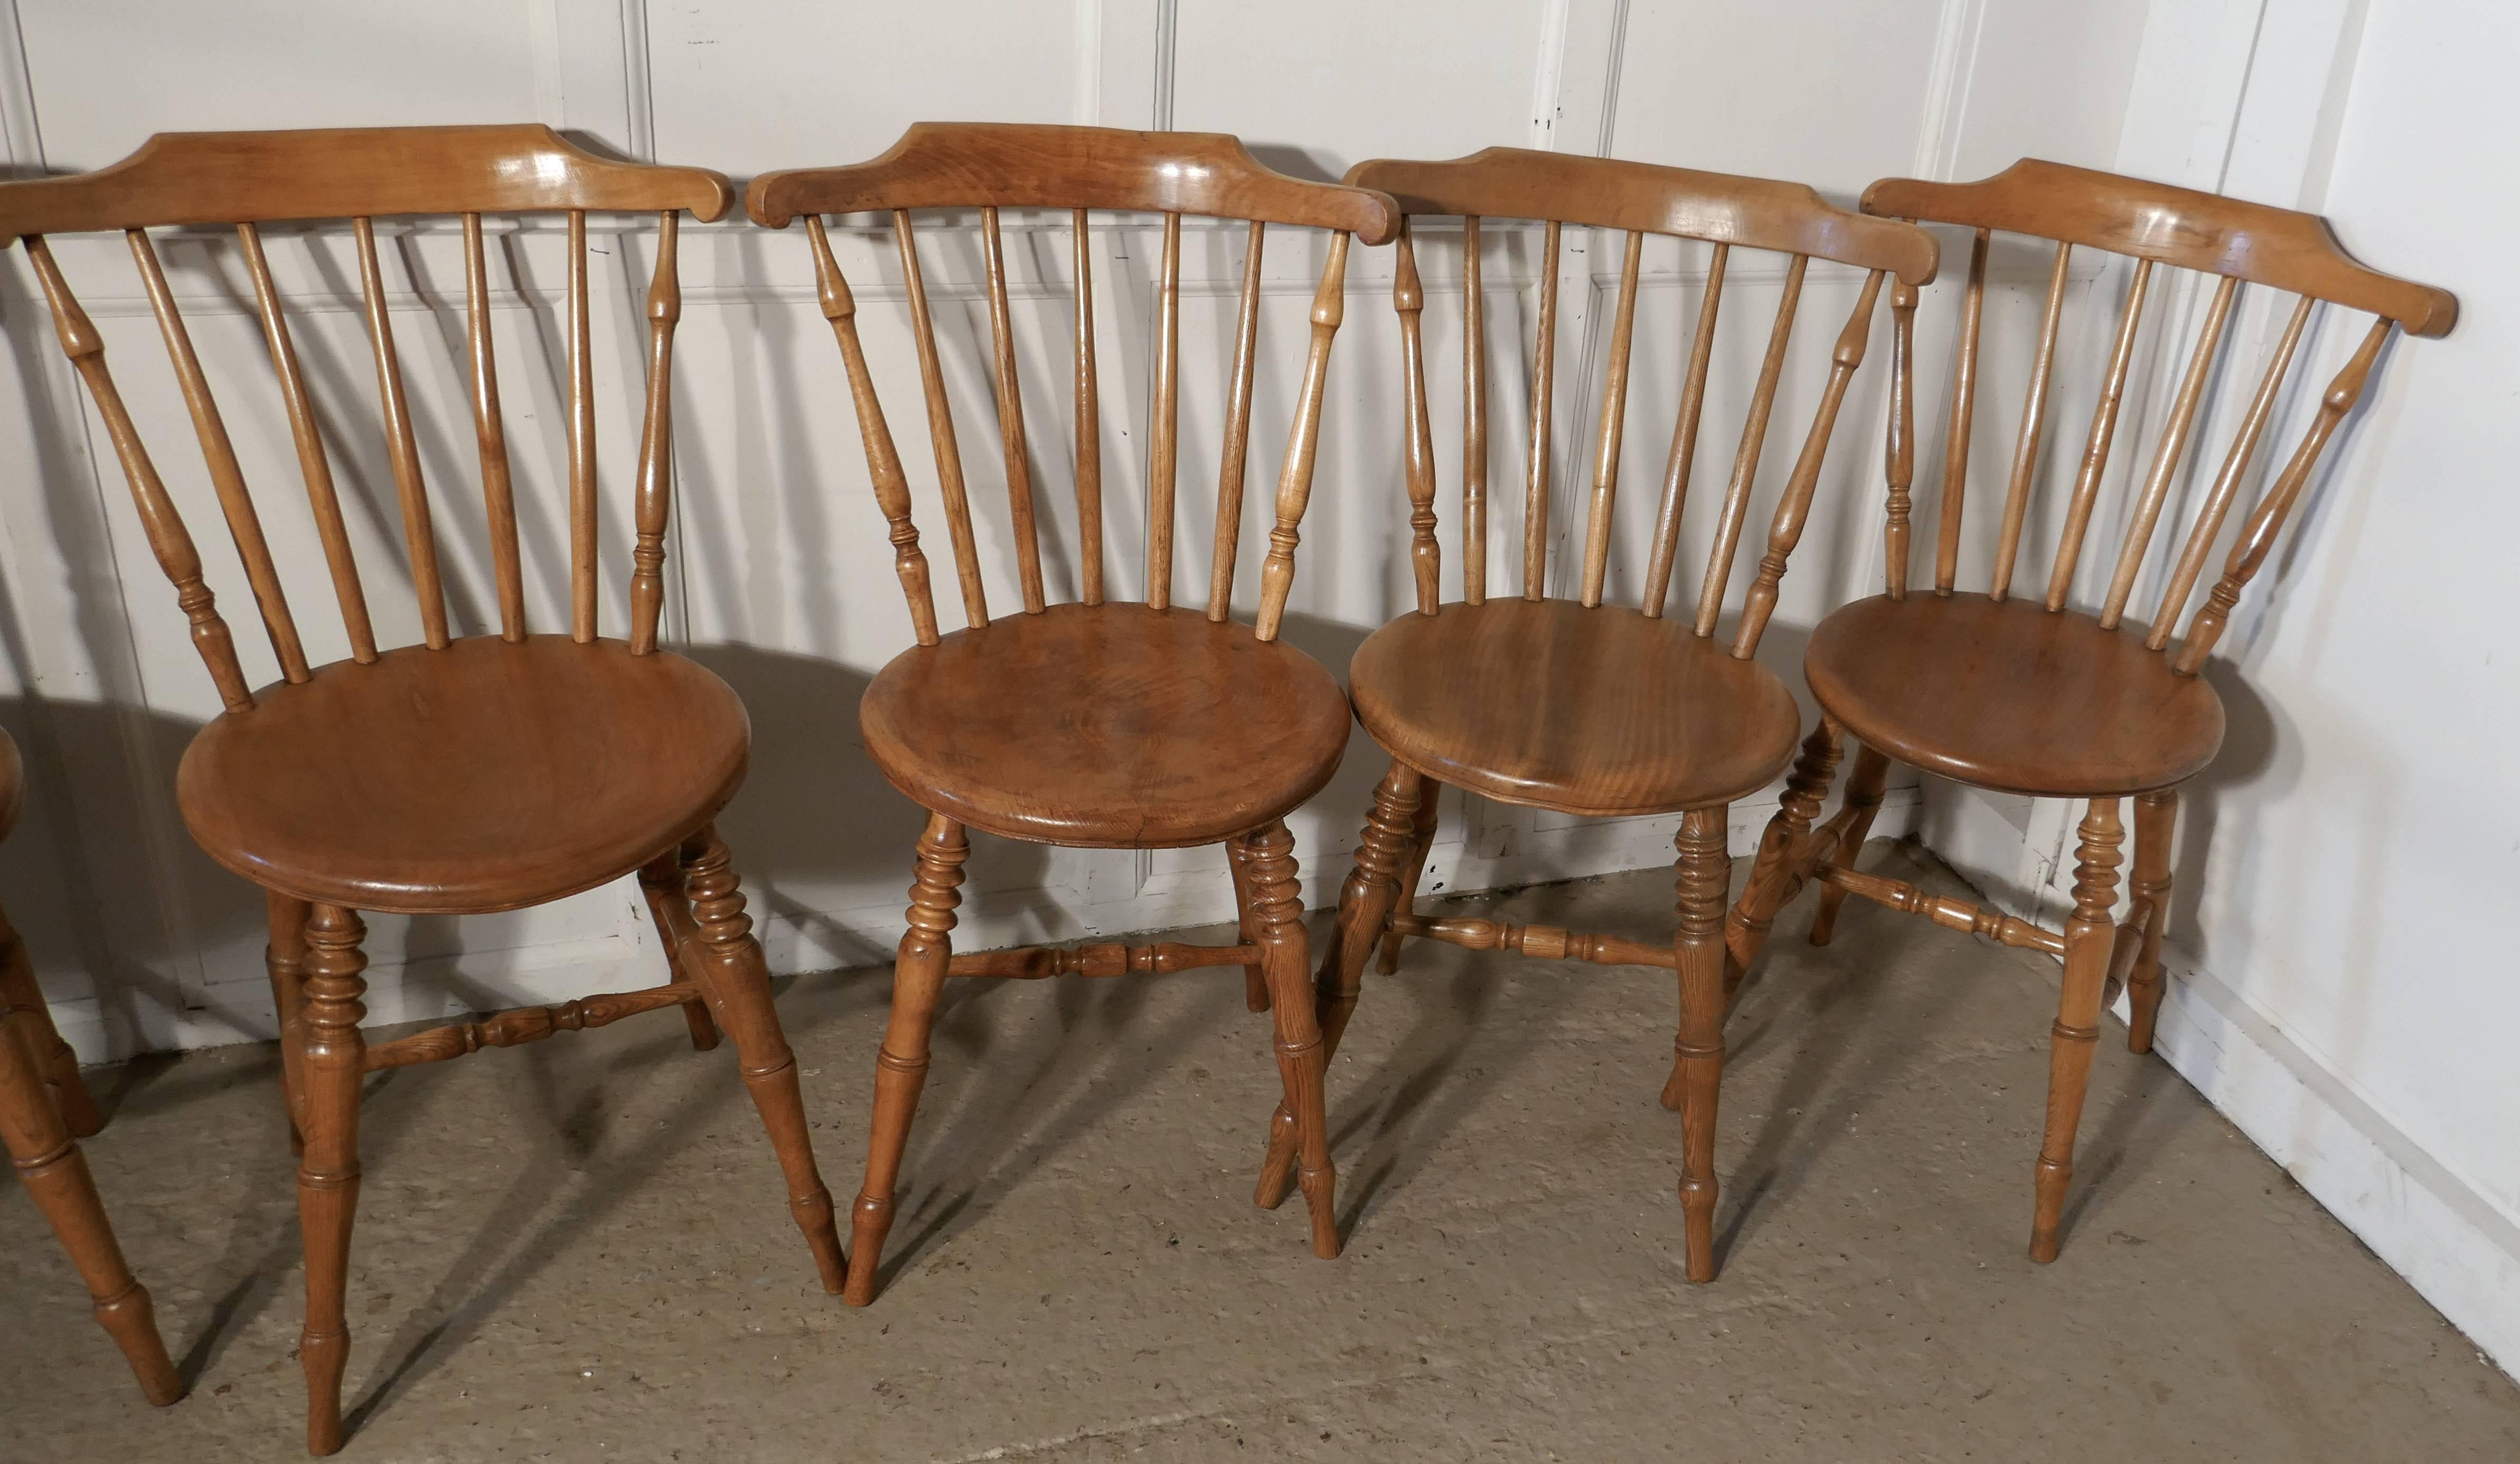 English Set of Six Beech and Ash Country Kitchen Dining Chairs